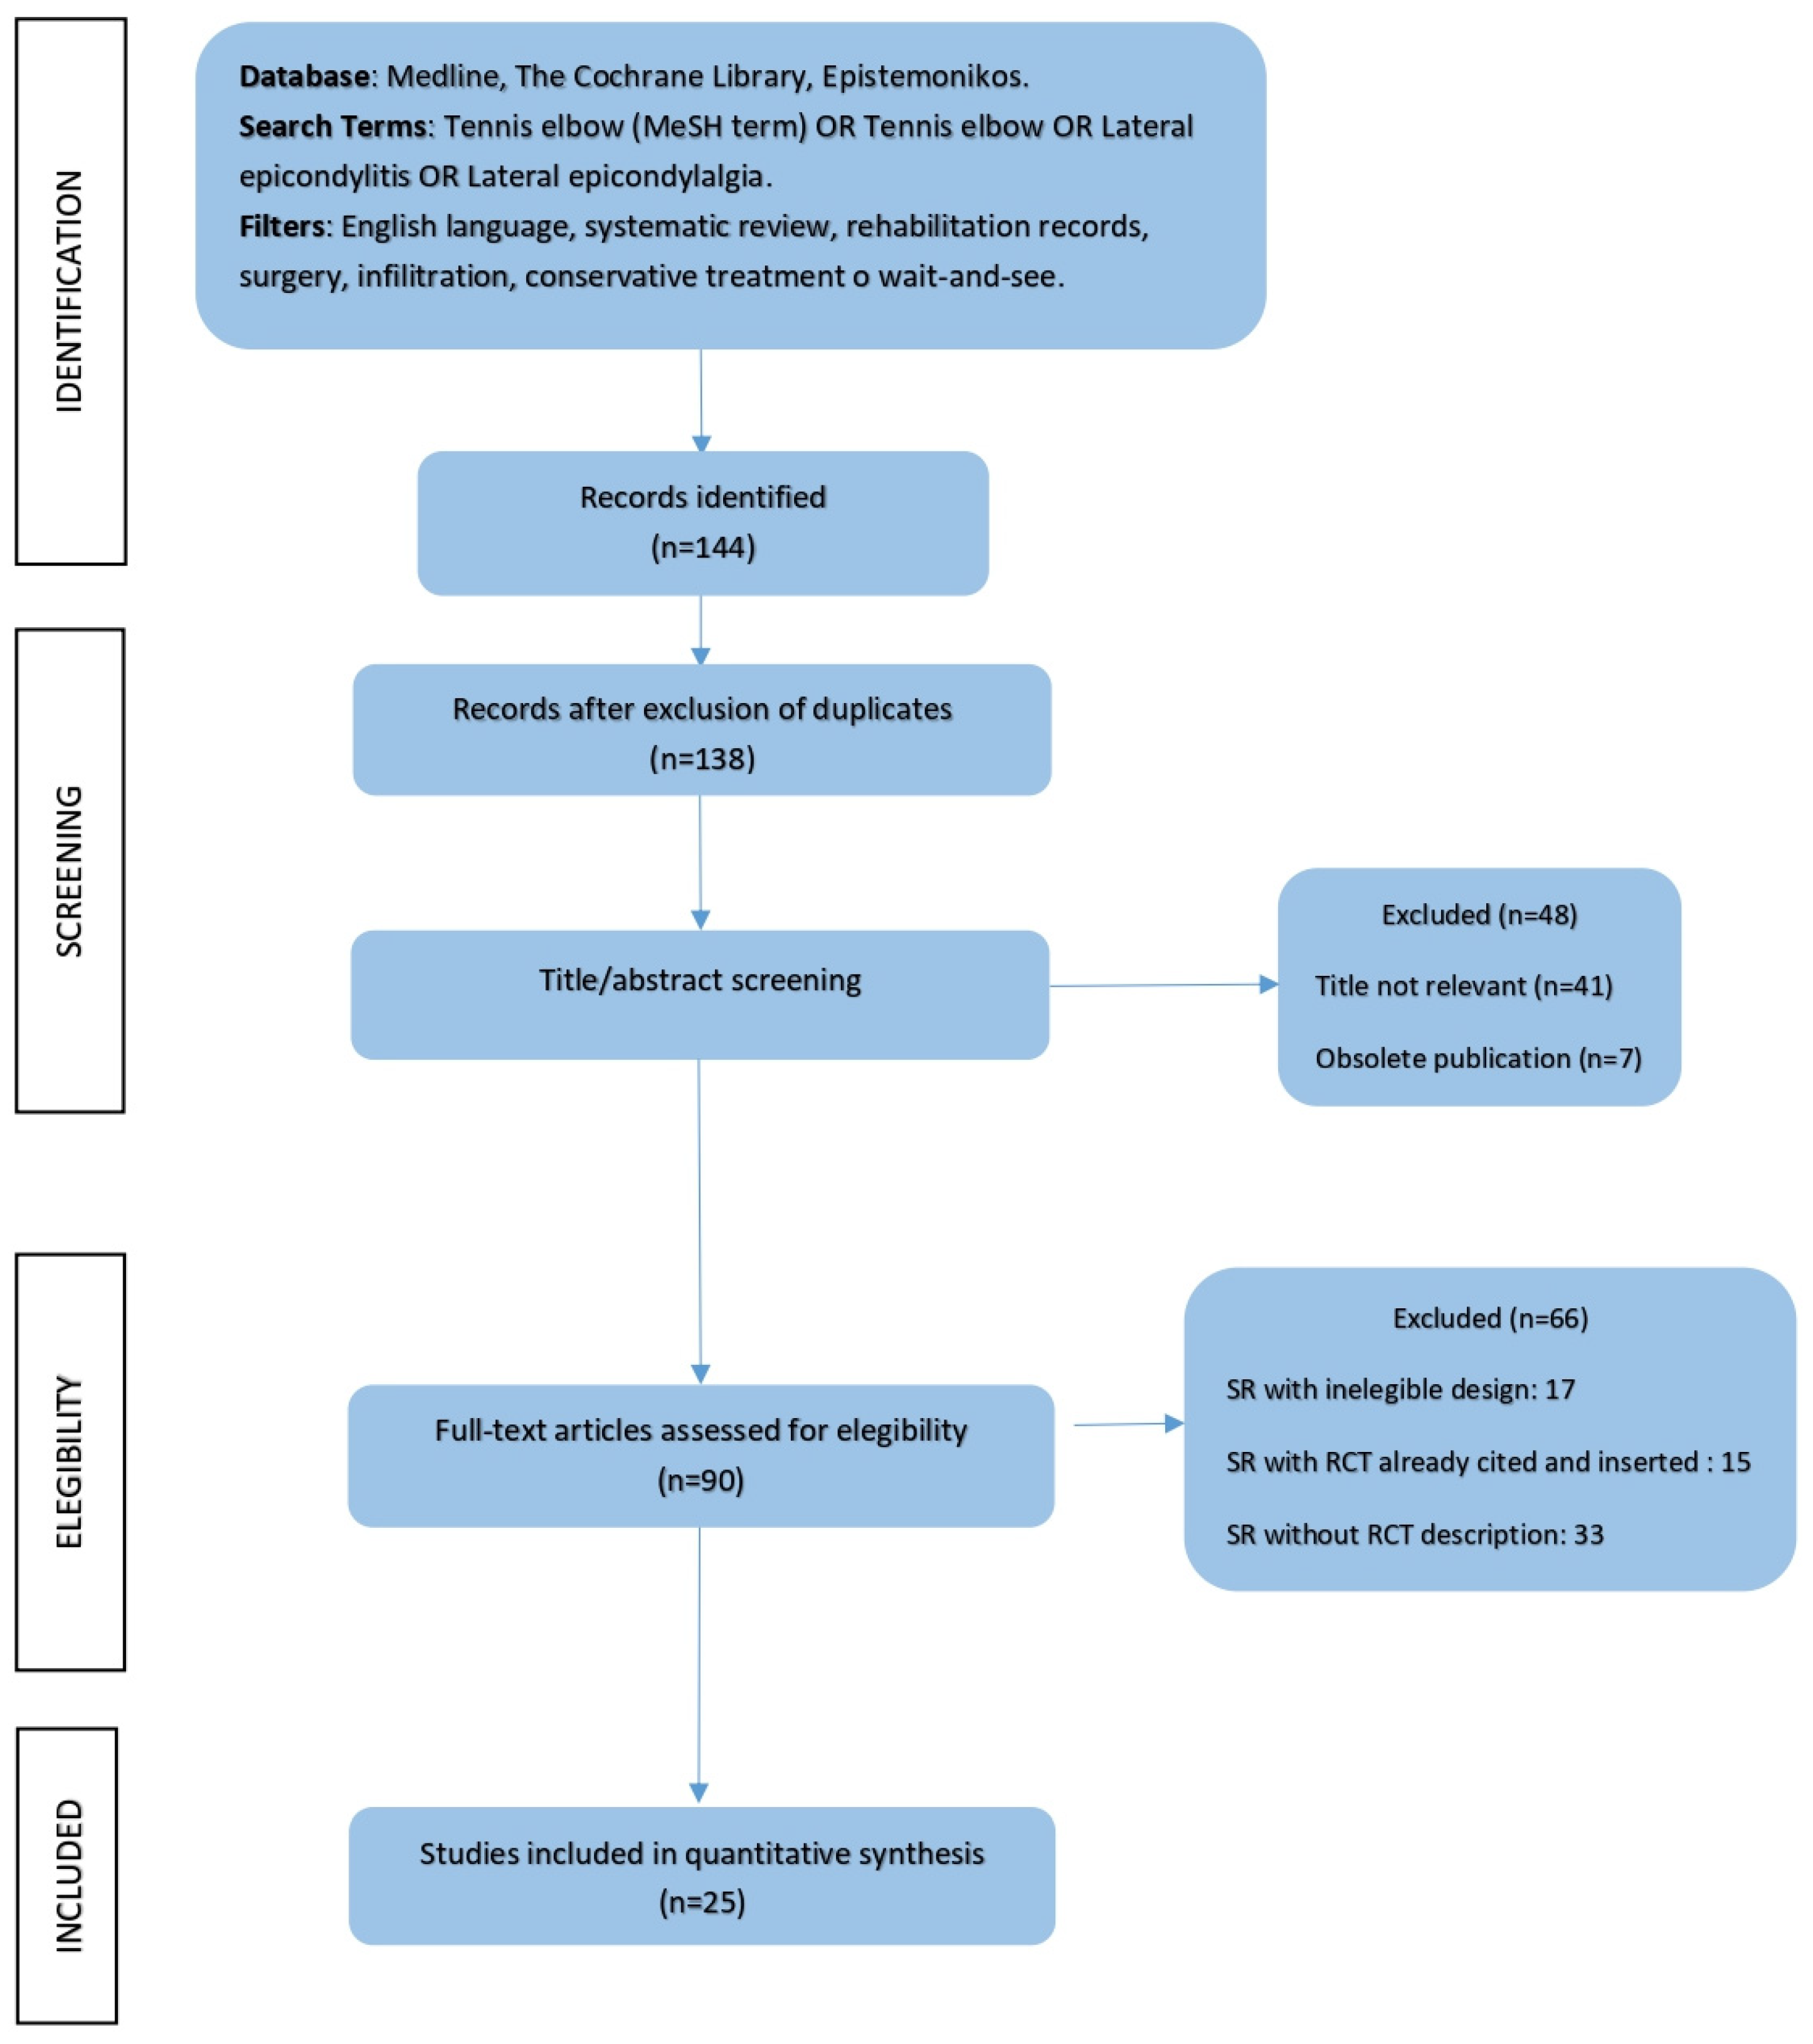 Healthcare Free Full-Text Treatment, Diagnostic Criteria and Variability of Terminology for Lateral Elbow Pain Findings from an Overview of Systematic Reviews